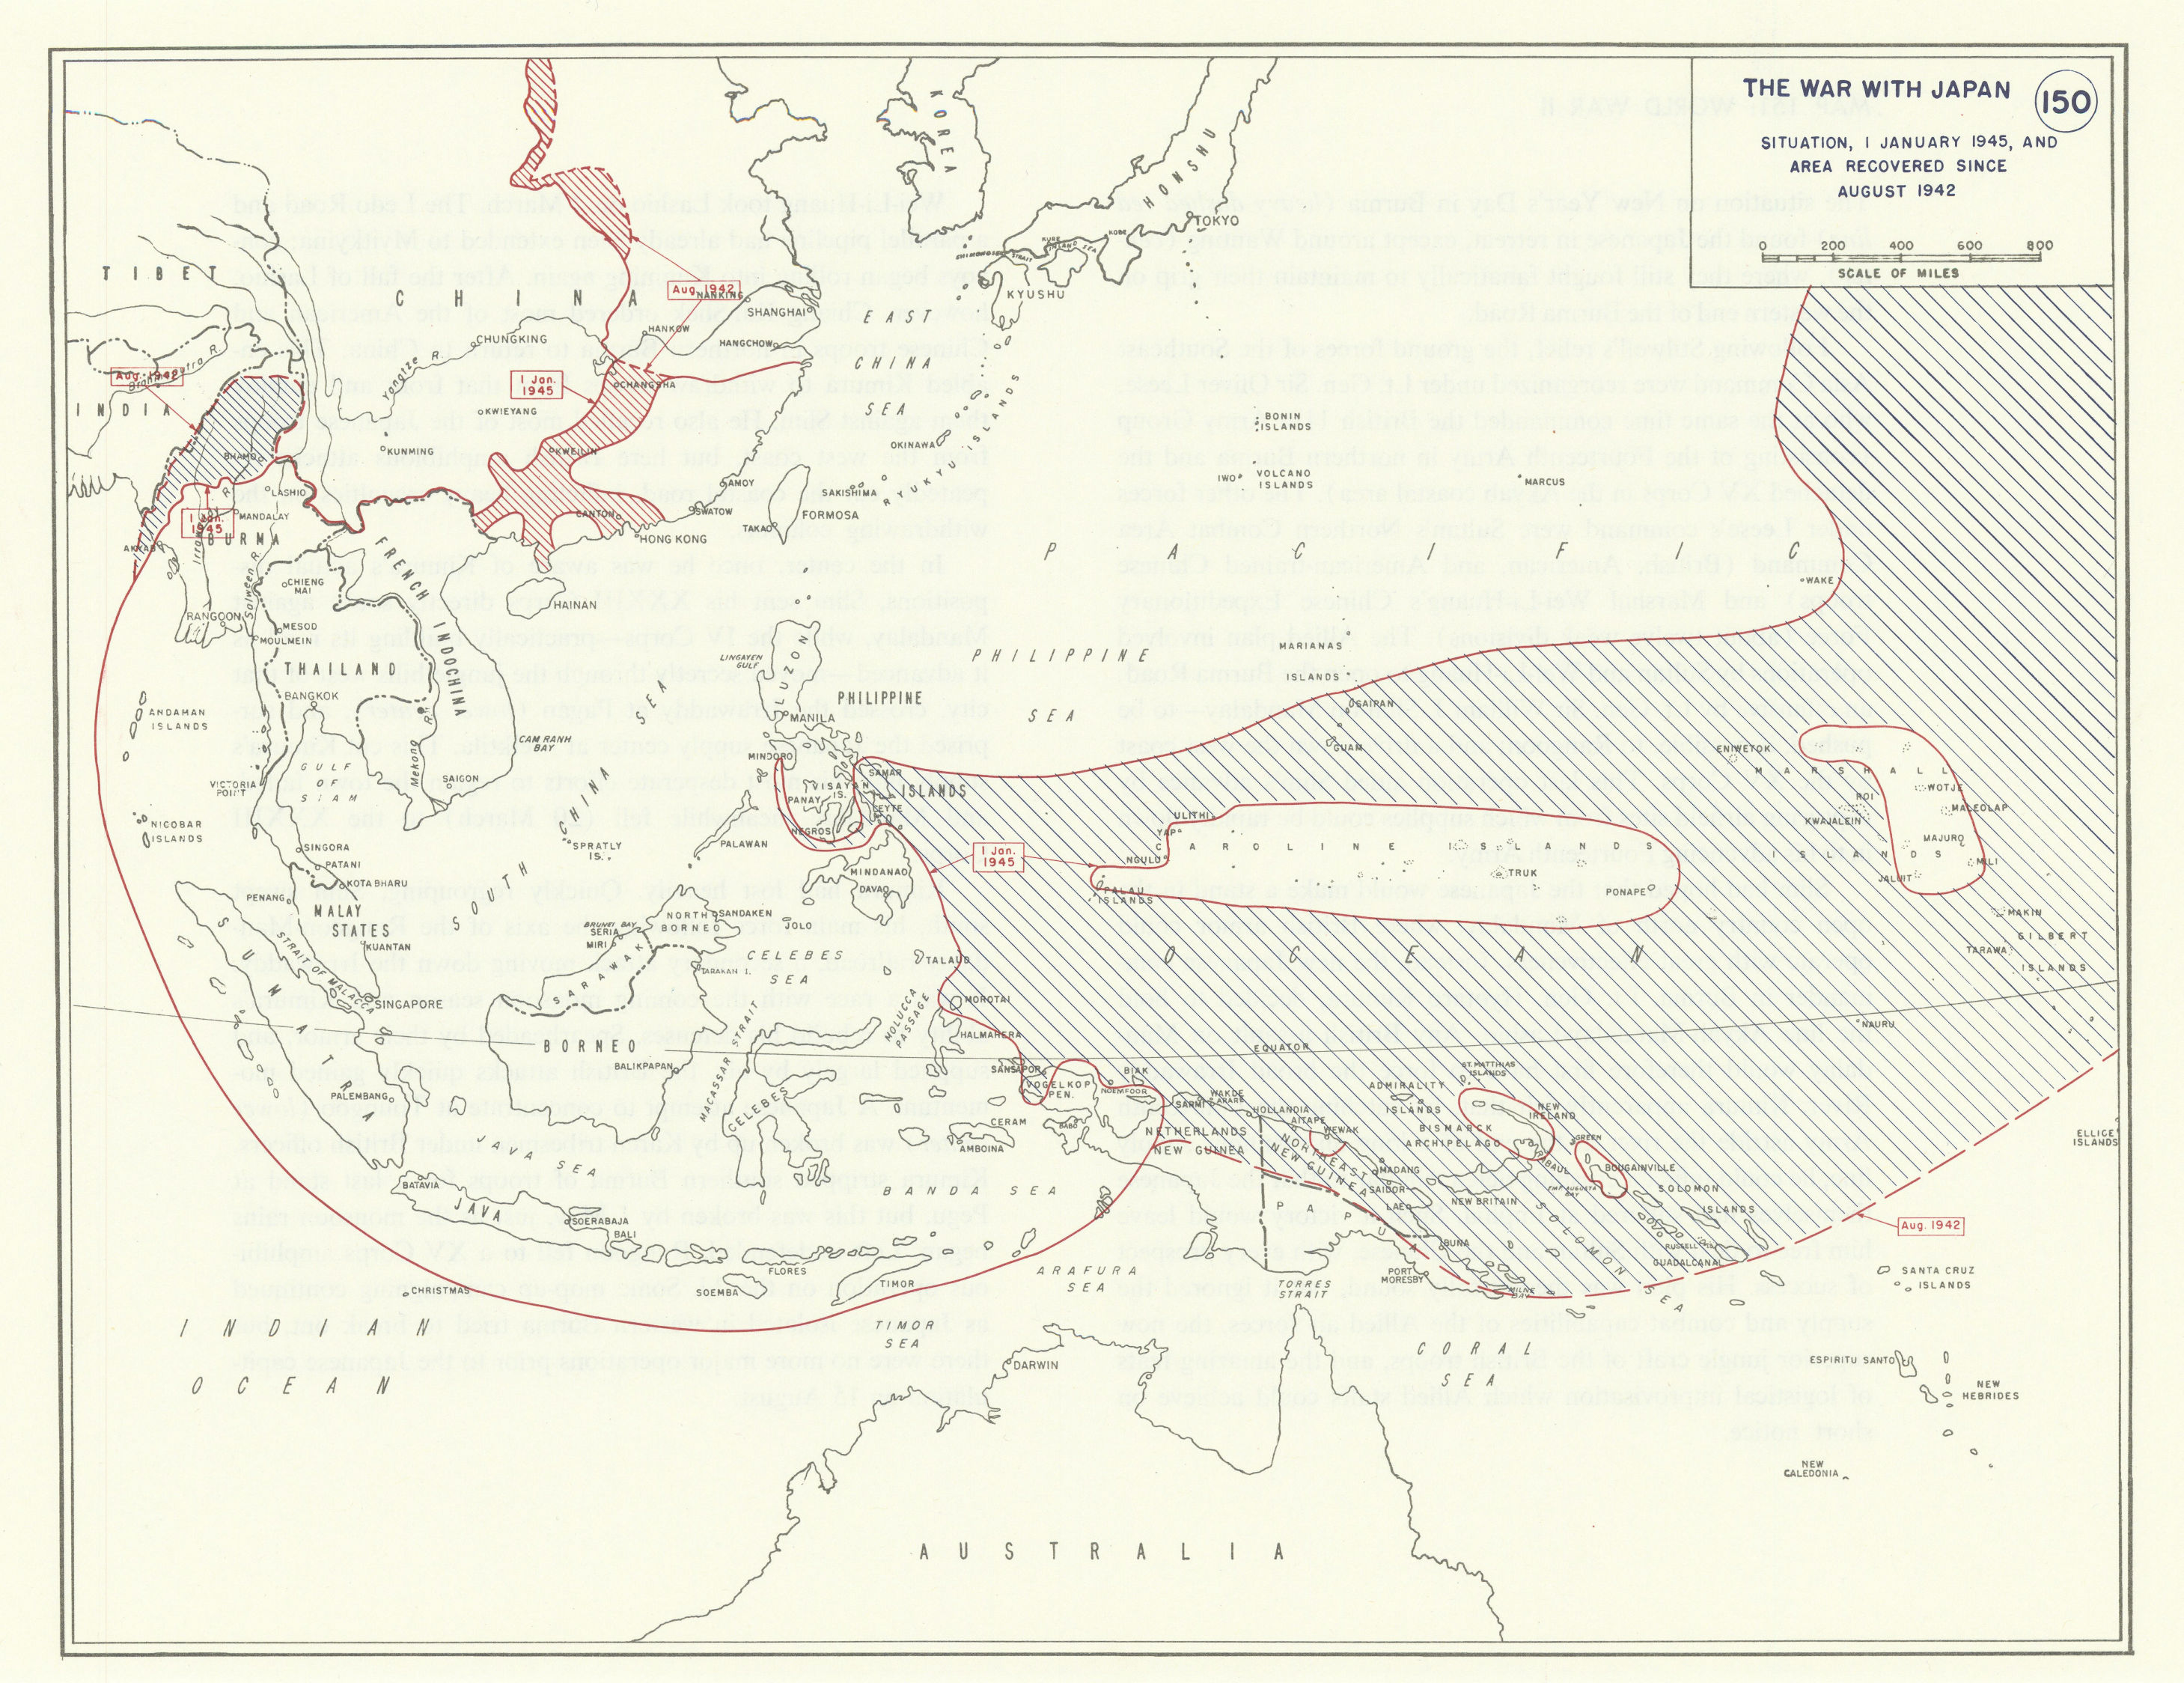 Associate Product World War 2. East Asia Pacific Theatre Aug 1942-Jan 1945 area recovered 1959 map